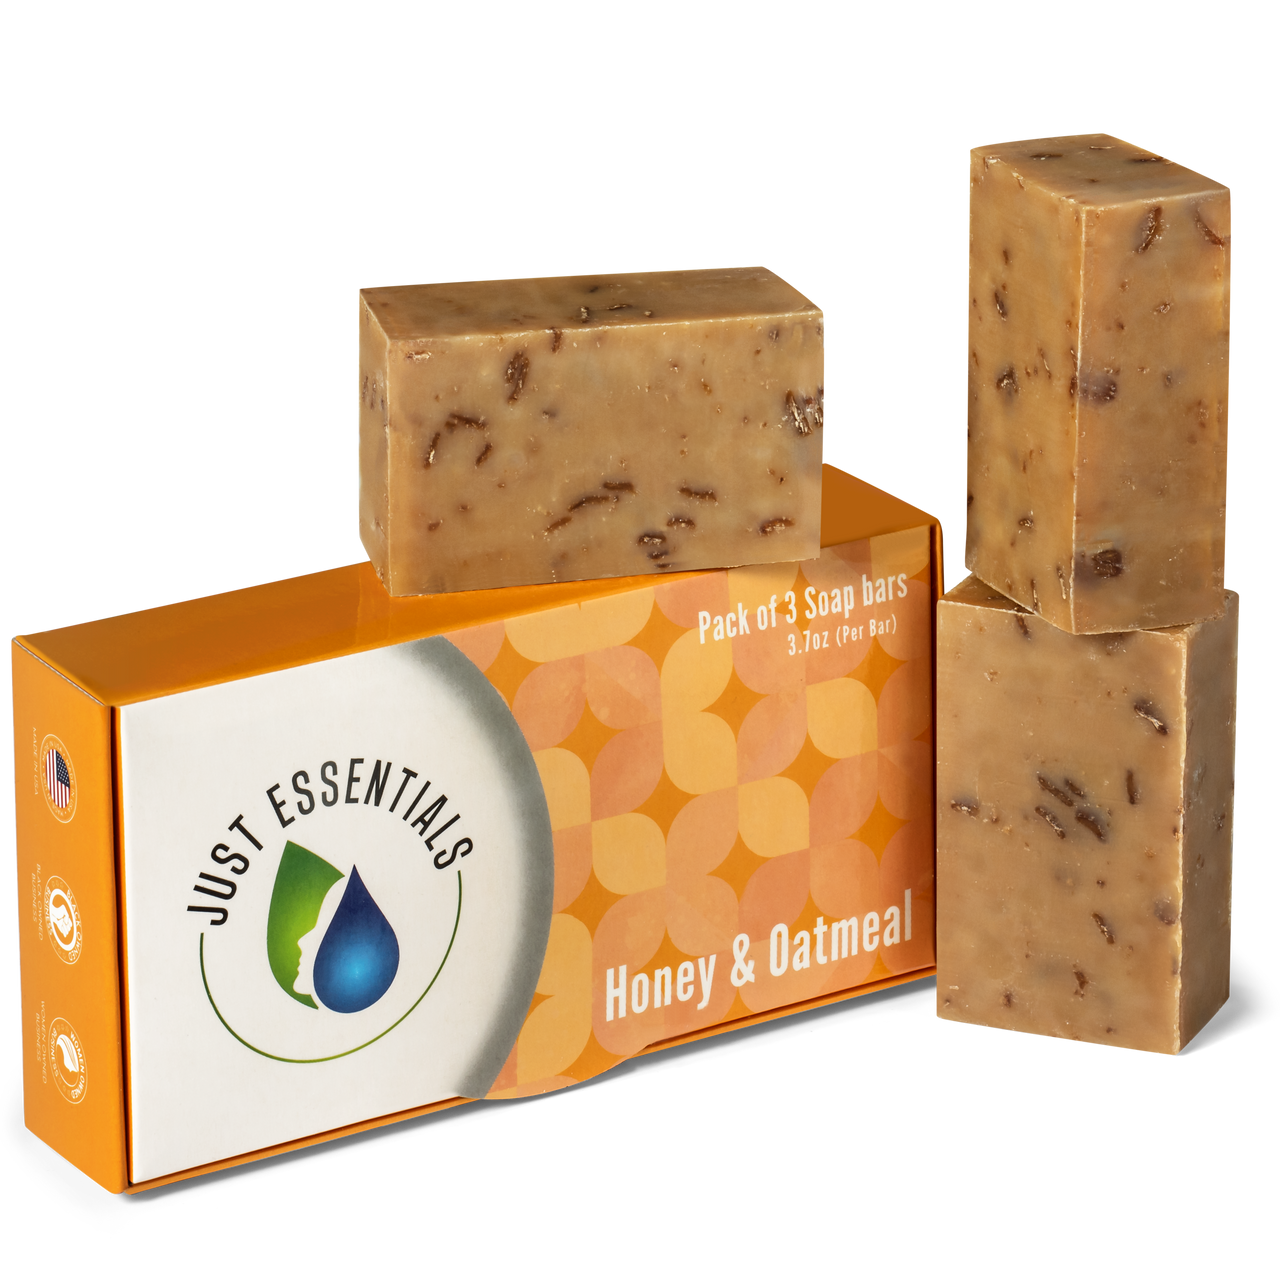 Just Pure Soap w/ Oatmeal